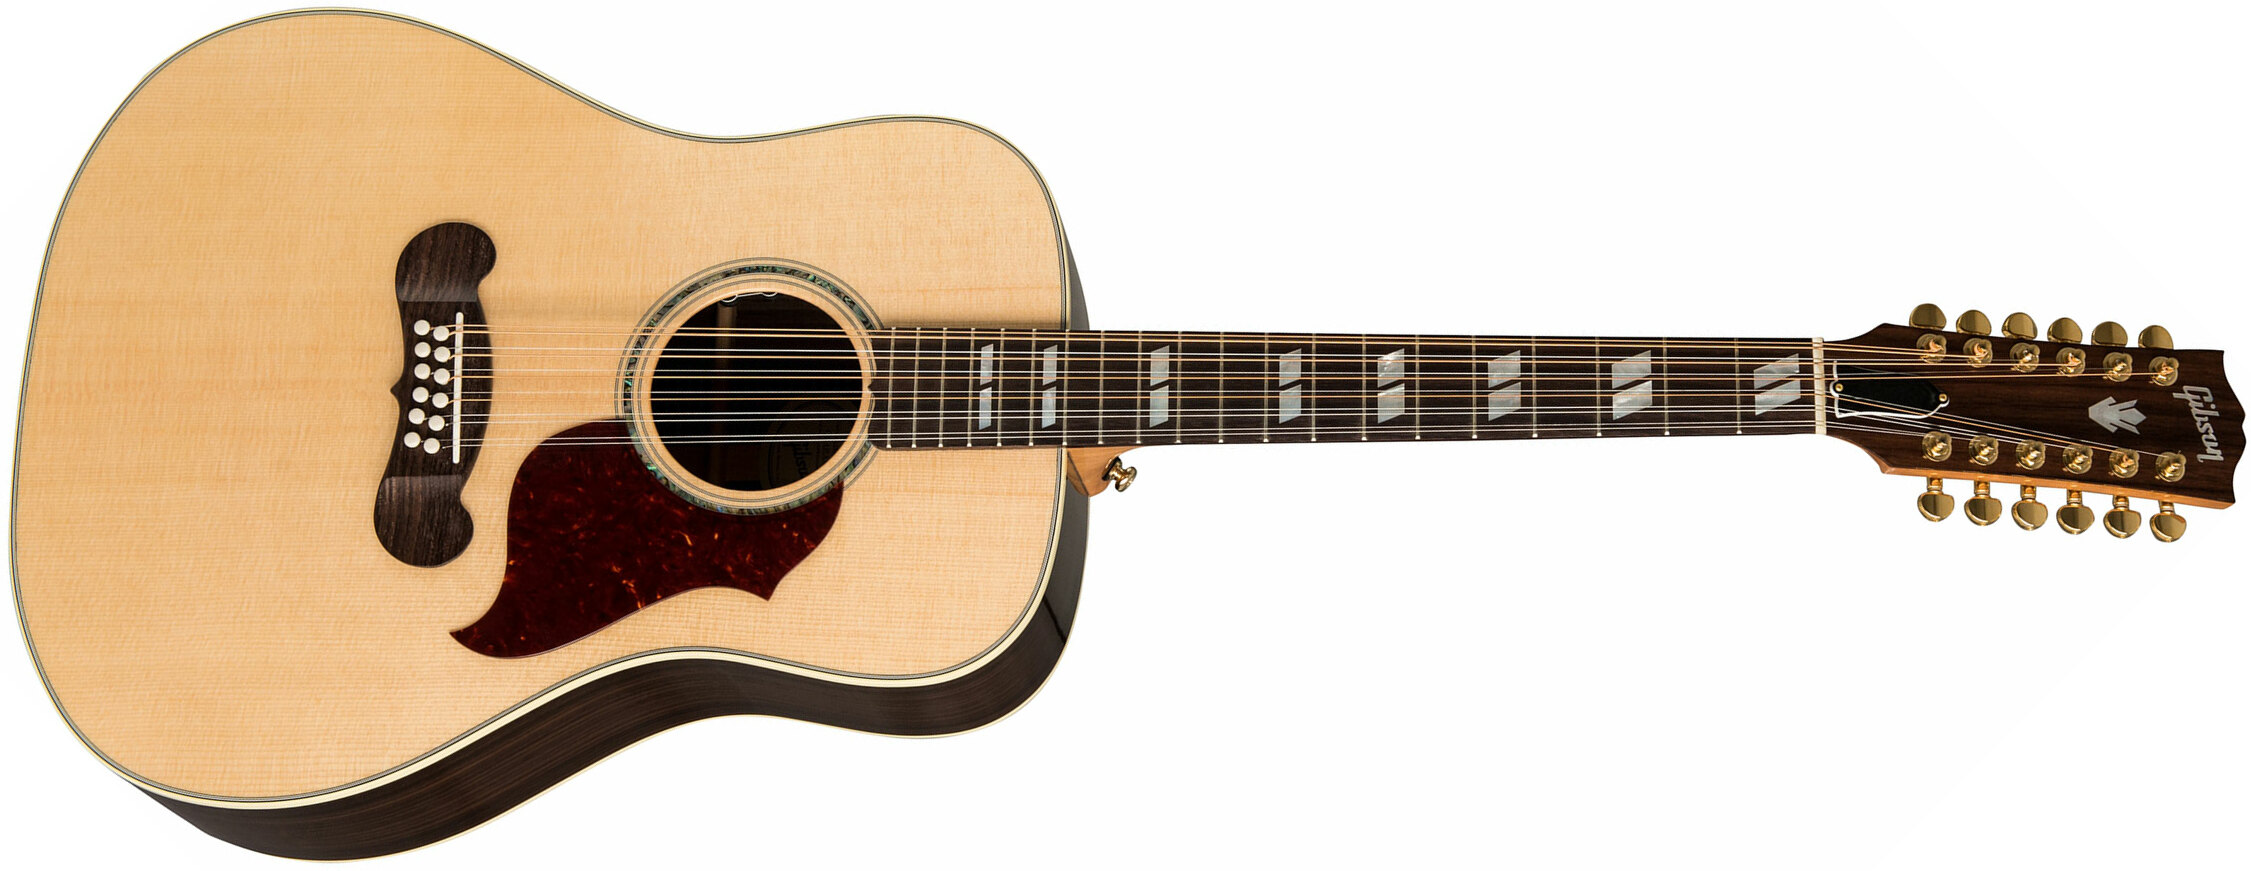 Gibson Songwriter 12-string 2019 Dreadnought 12-cordes Epicea Palissandre Rw - Antique Natural - Guitare Acoustique - Main picture